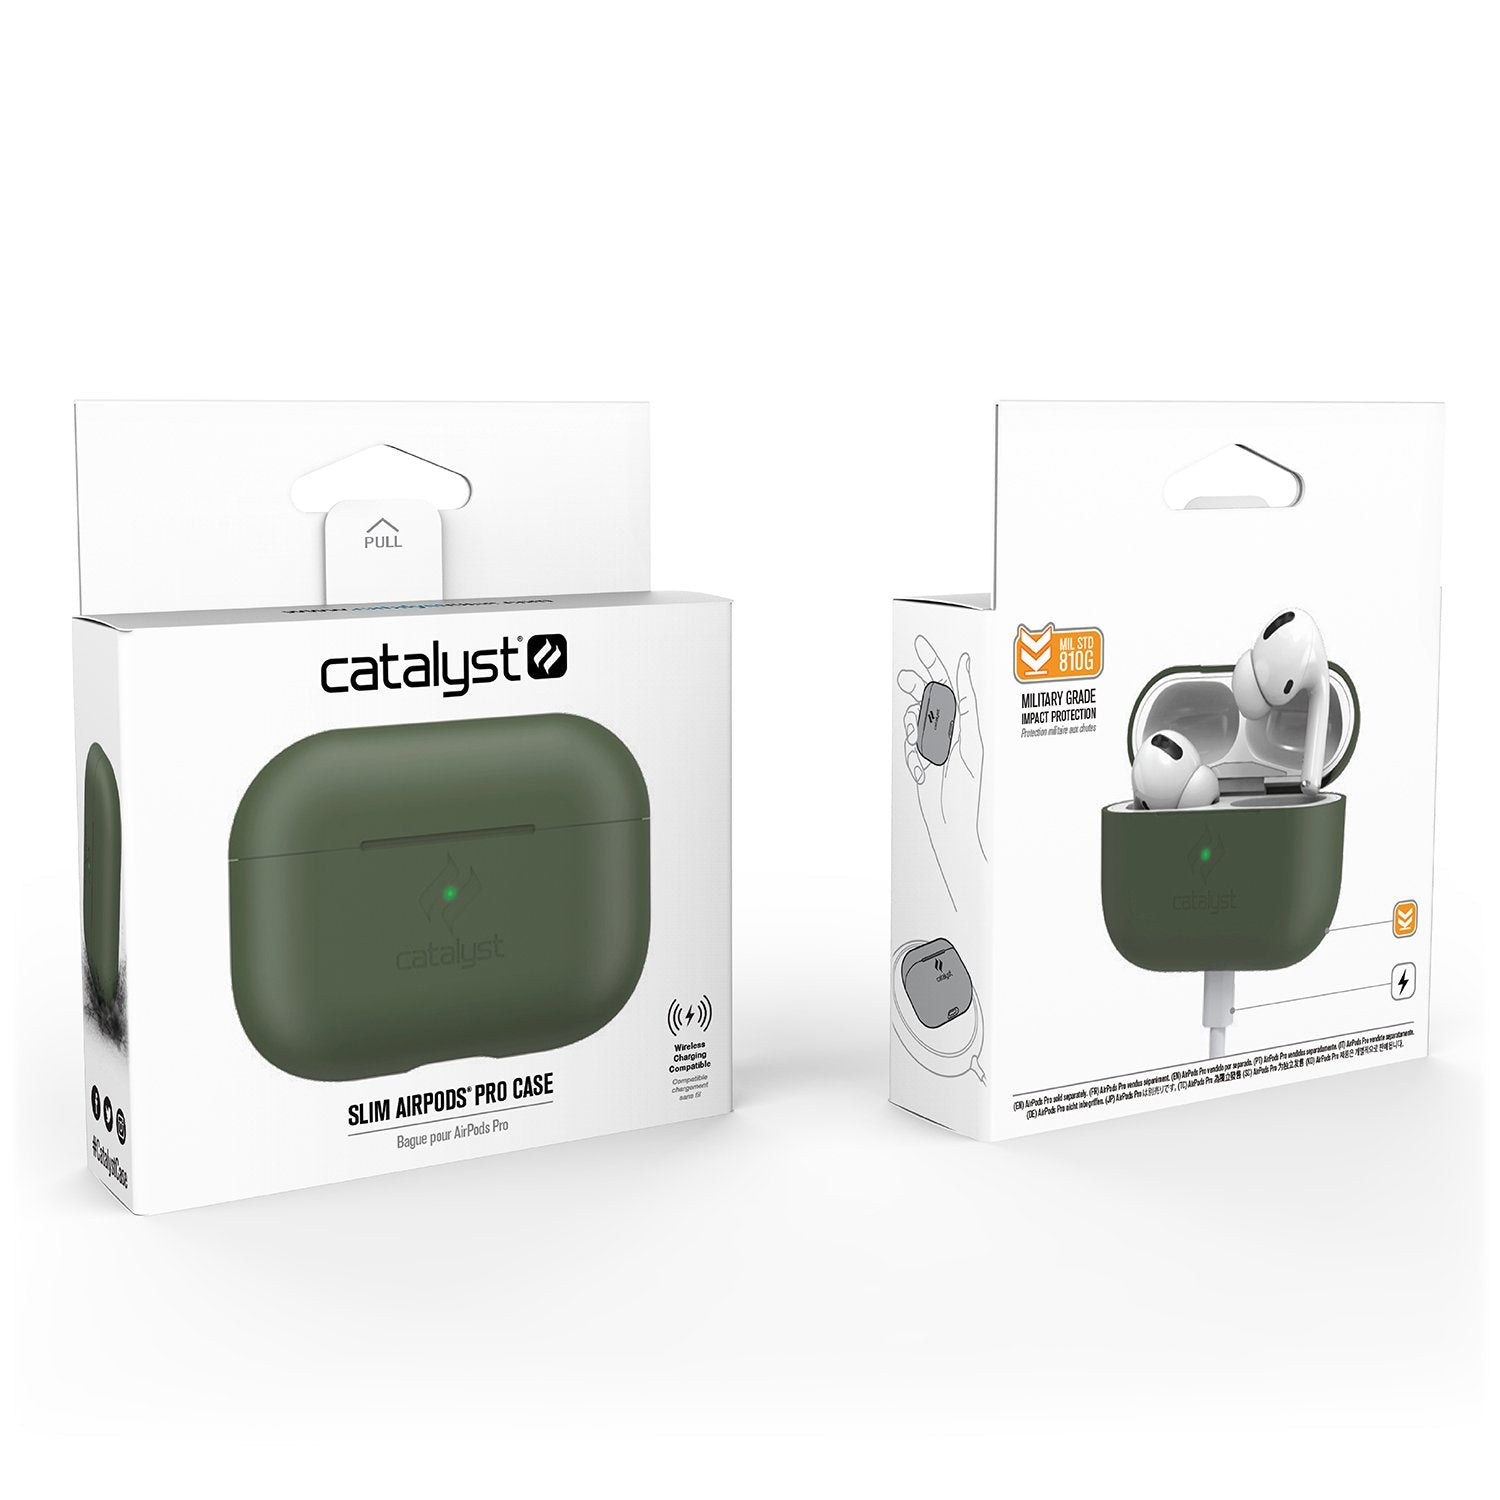 Catalyst airpods pro gen 2/1 slim case showing the front and back view of the packaging in an army green colorway